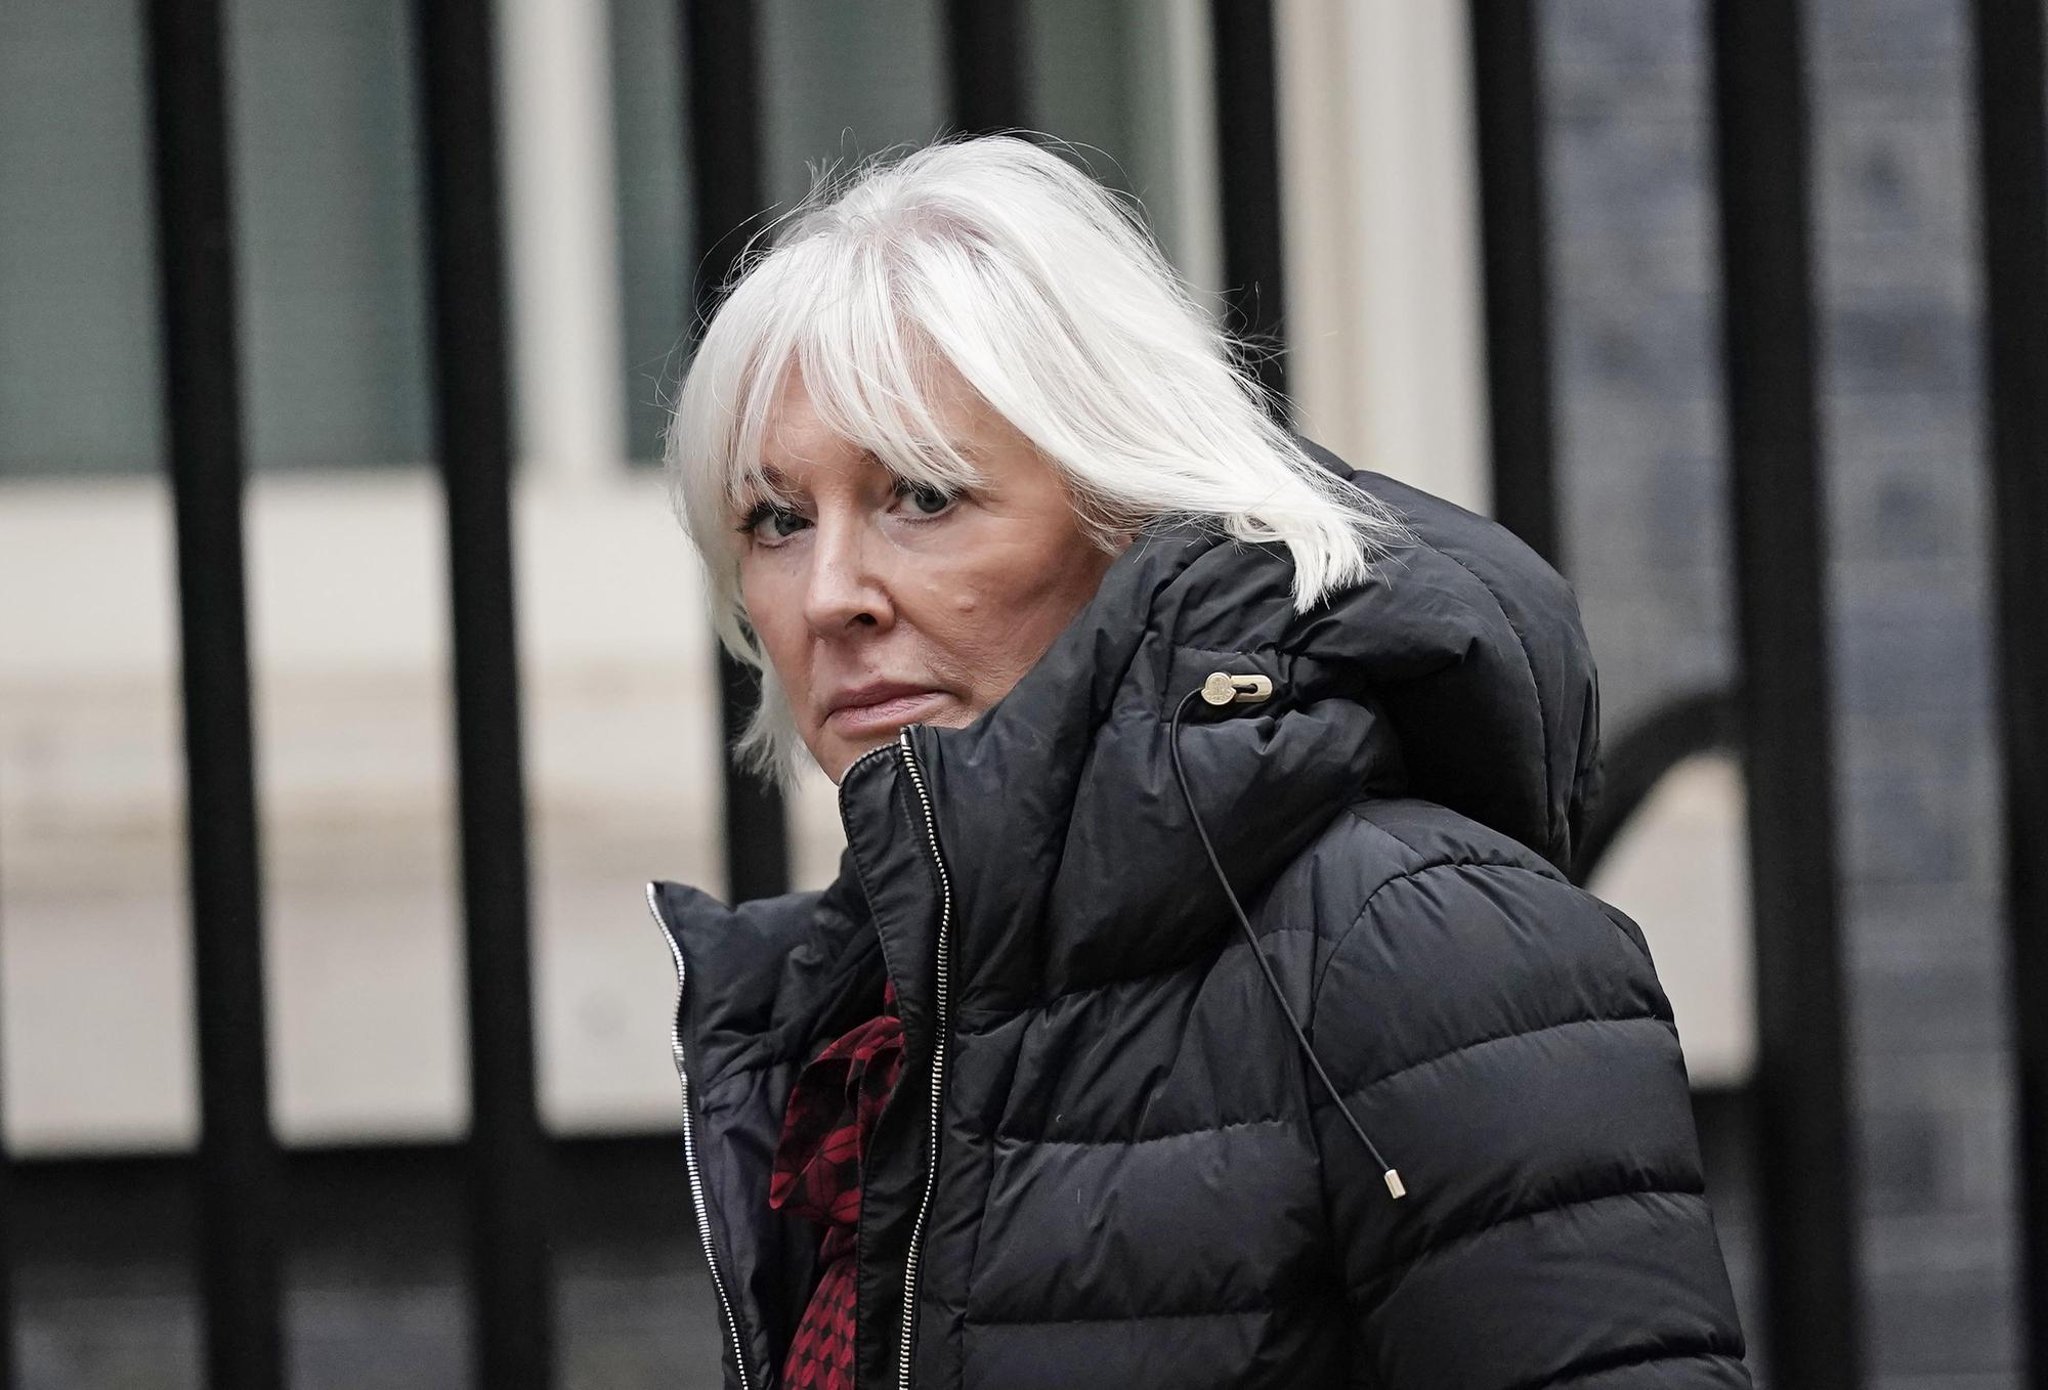 Nadine Dorries confirms BBC licence fee frozen for two years and funding model to be reviewed